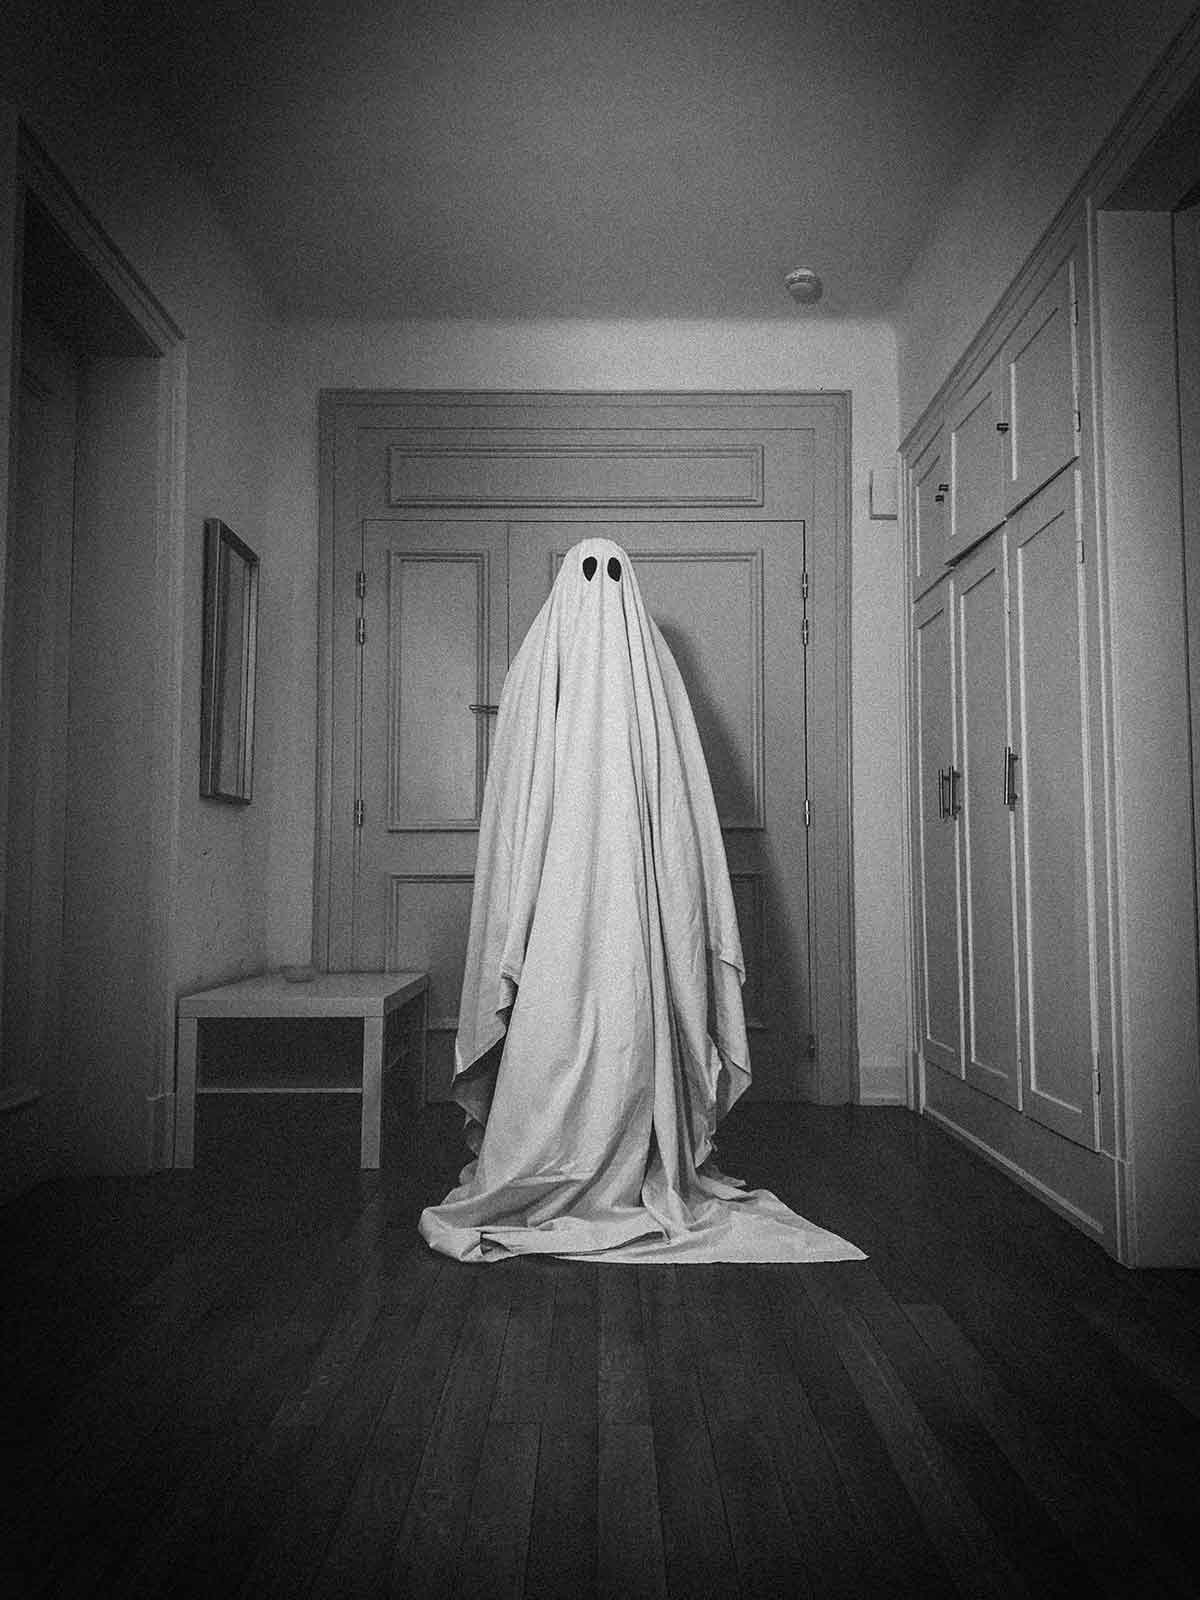 A person dressed as a ghost for Halloween 2020.